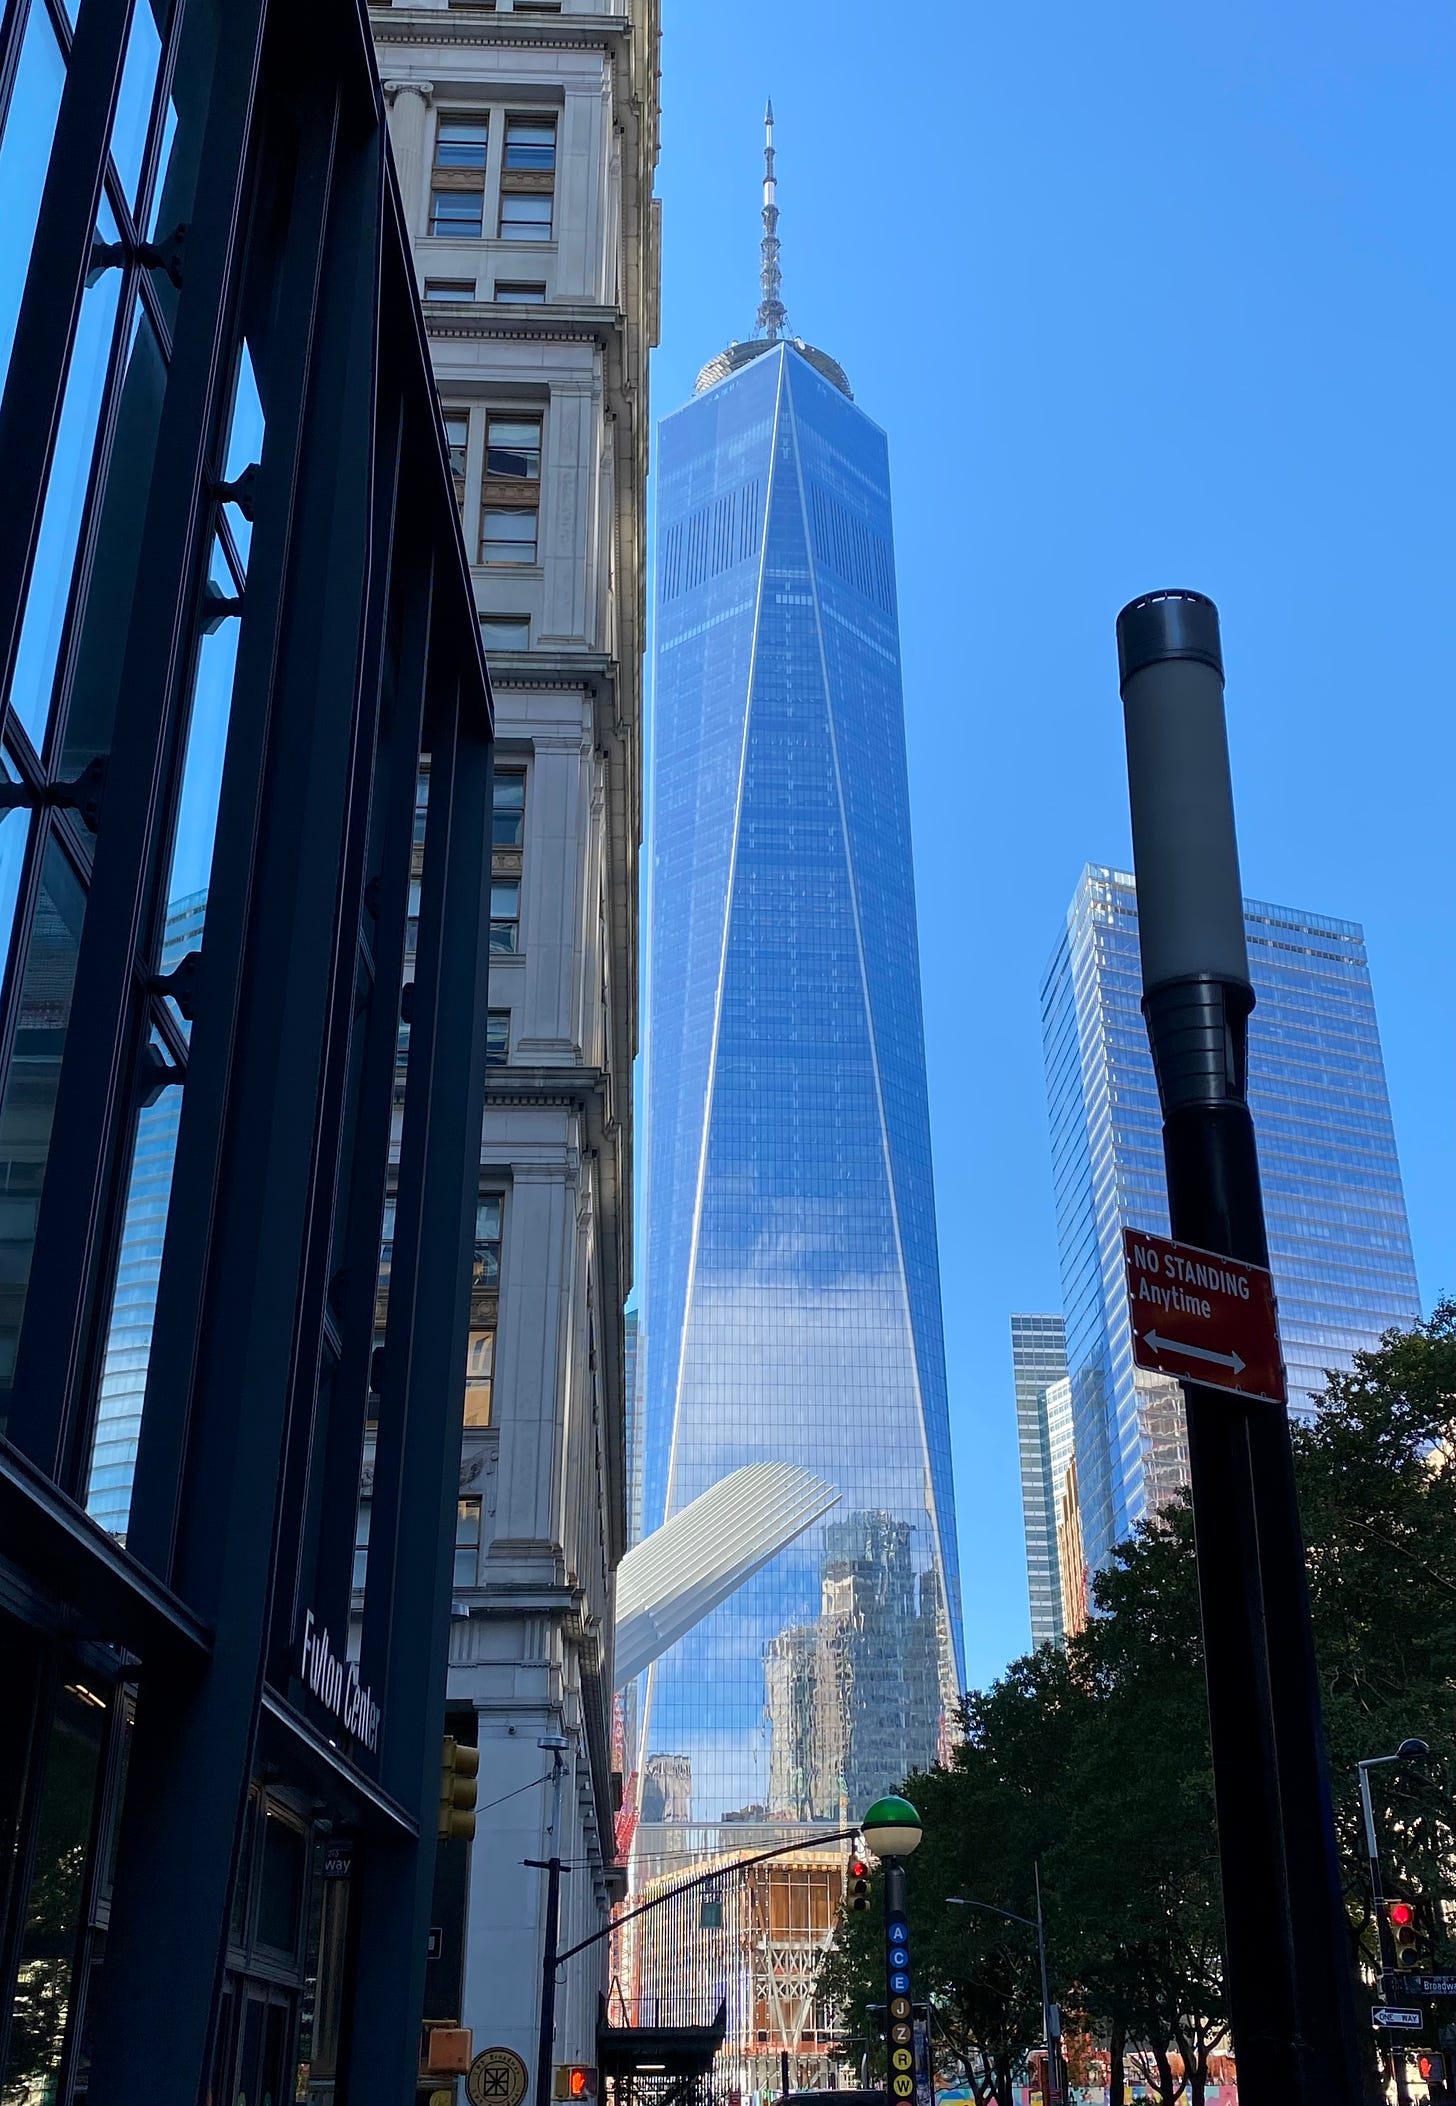 One World Trade Center against a clear blue sky. The light is so bright, you can see the buildings across the street reflected in the its glass facade.